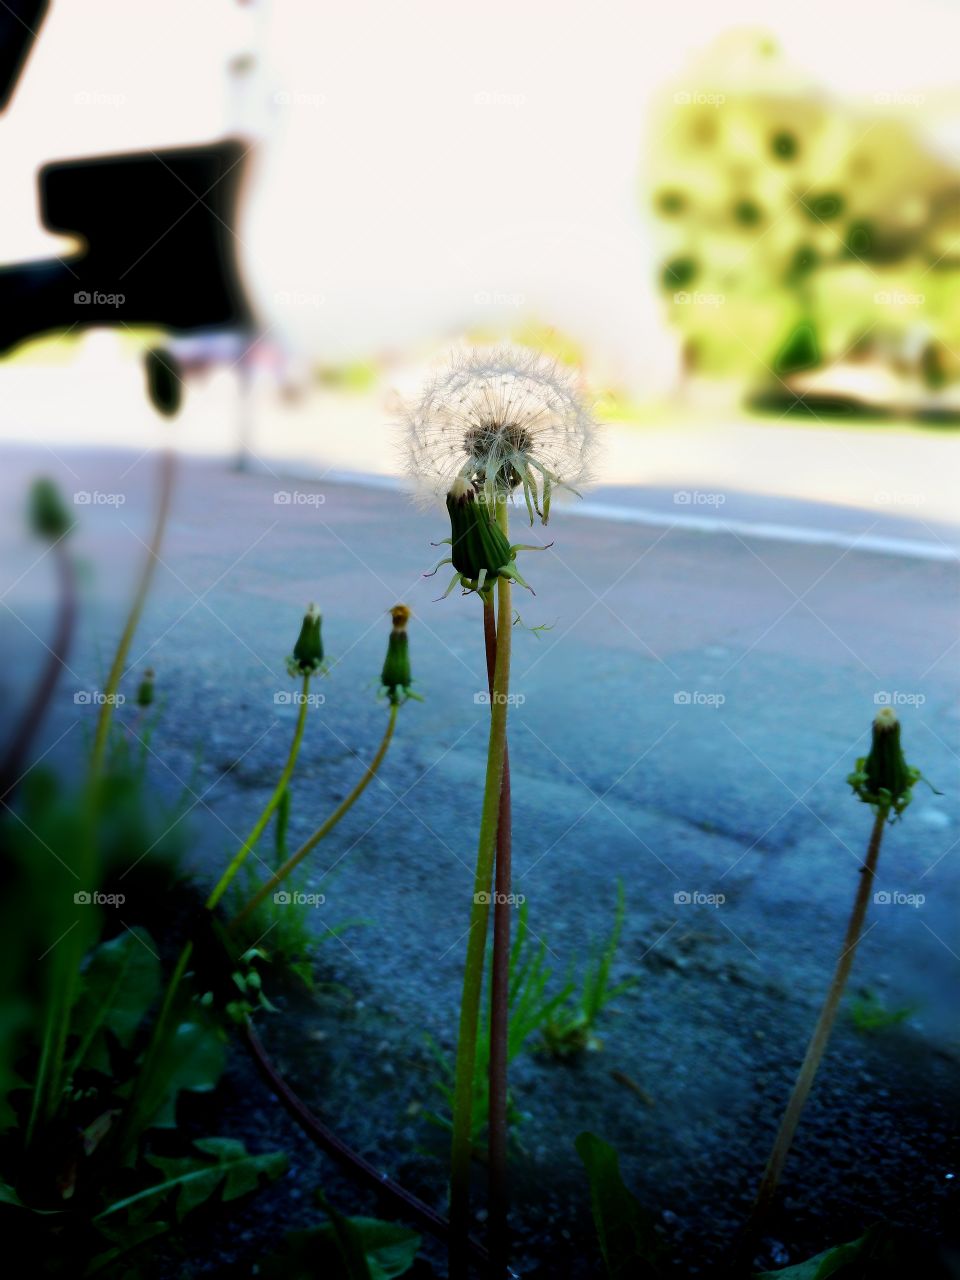 Cityweed at a busstop in Malmoe, Sweden.